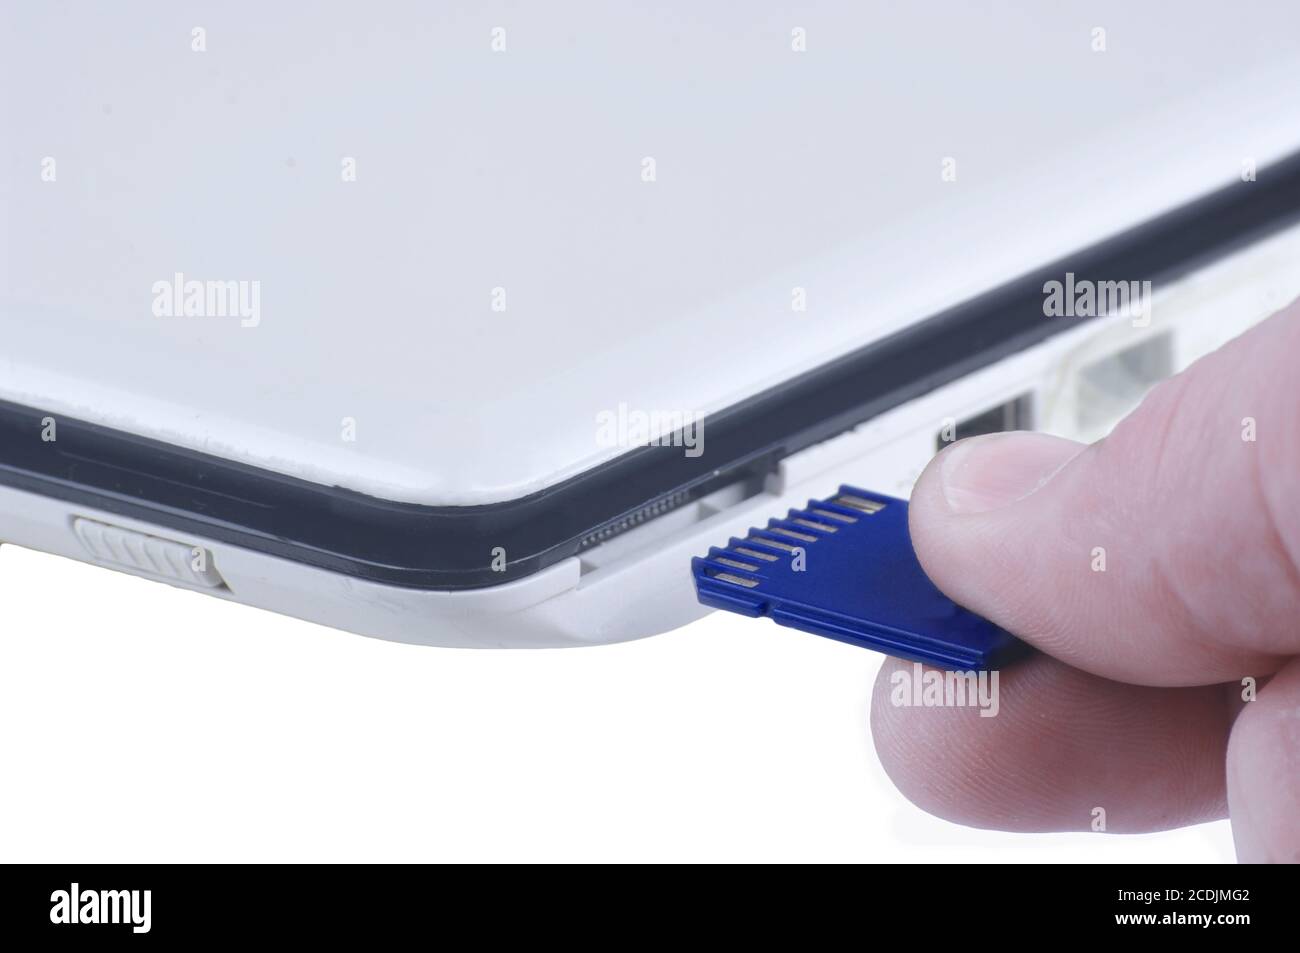 Plugging removable flash disk memory into laptop  slot Stock Photo